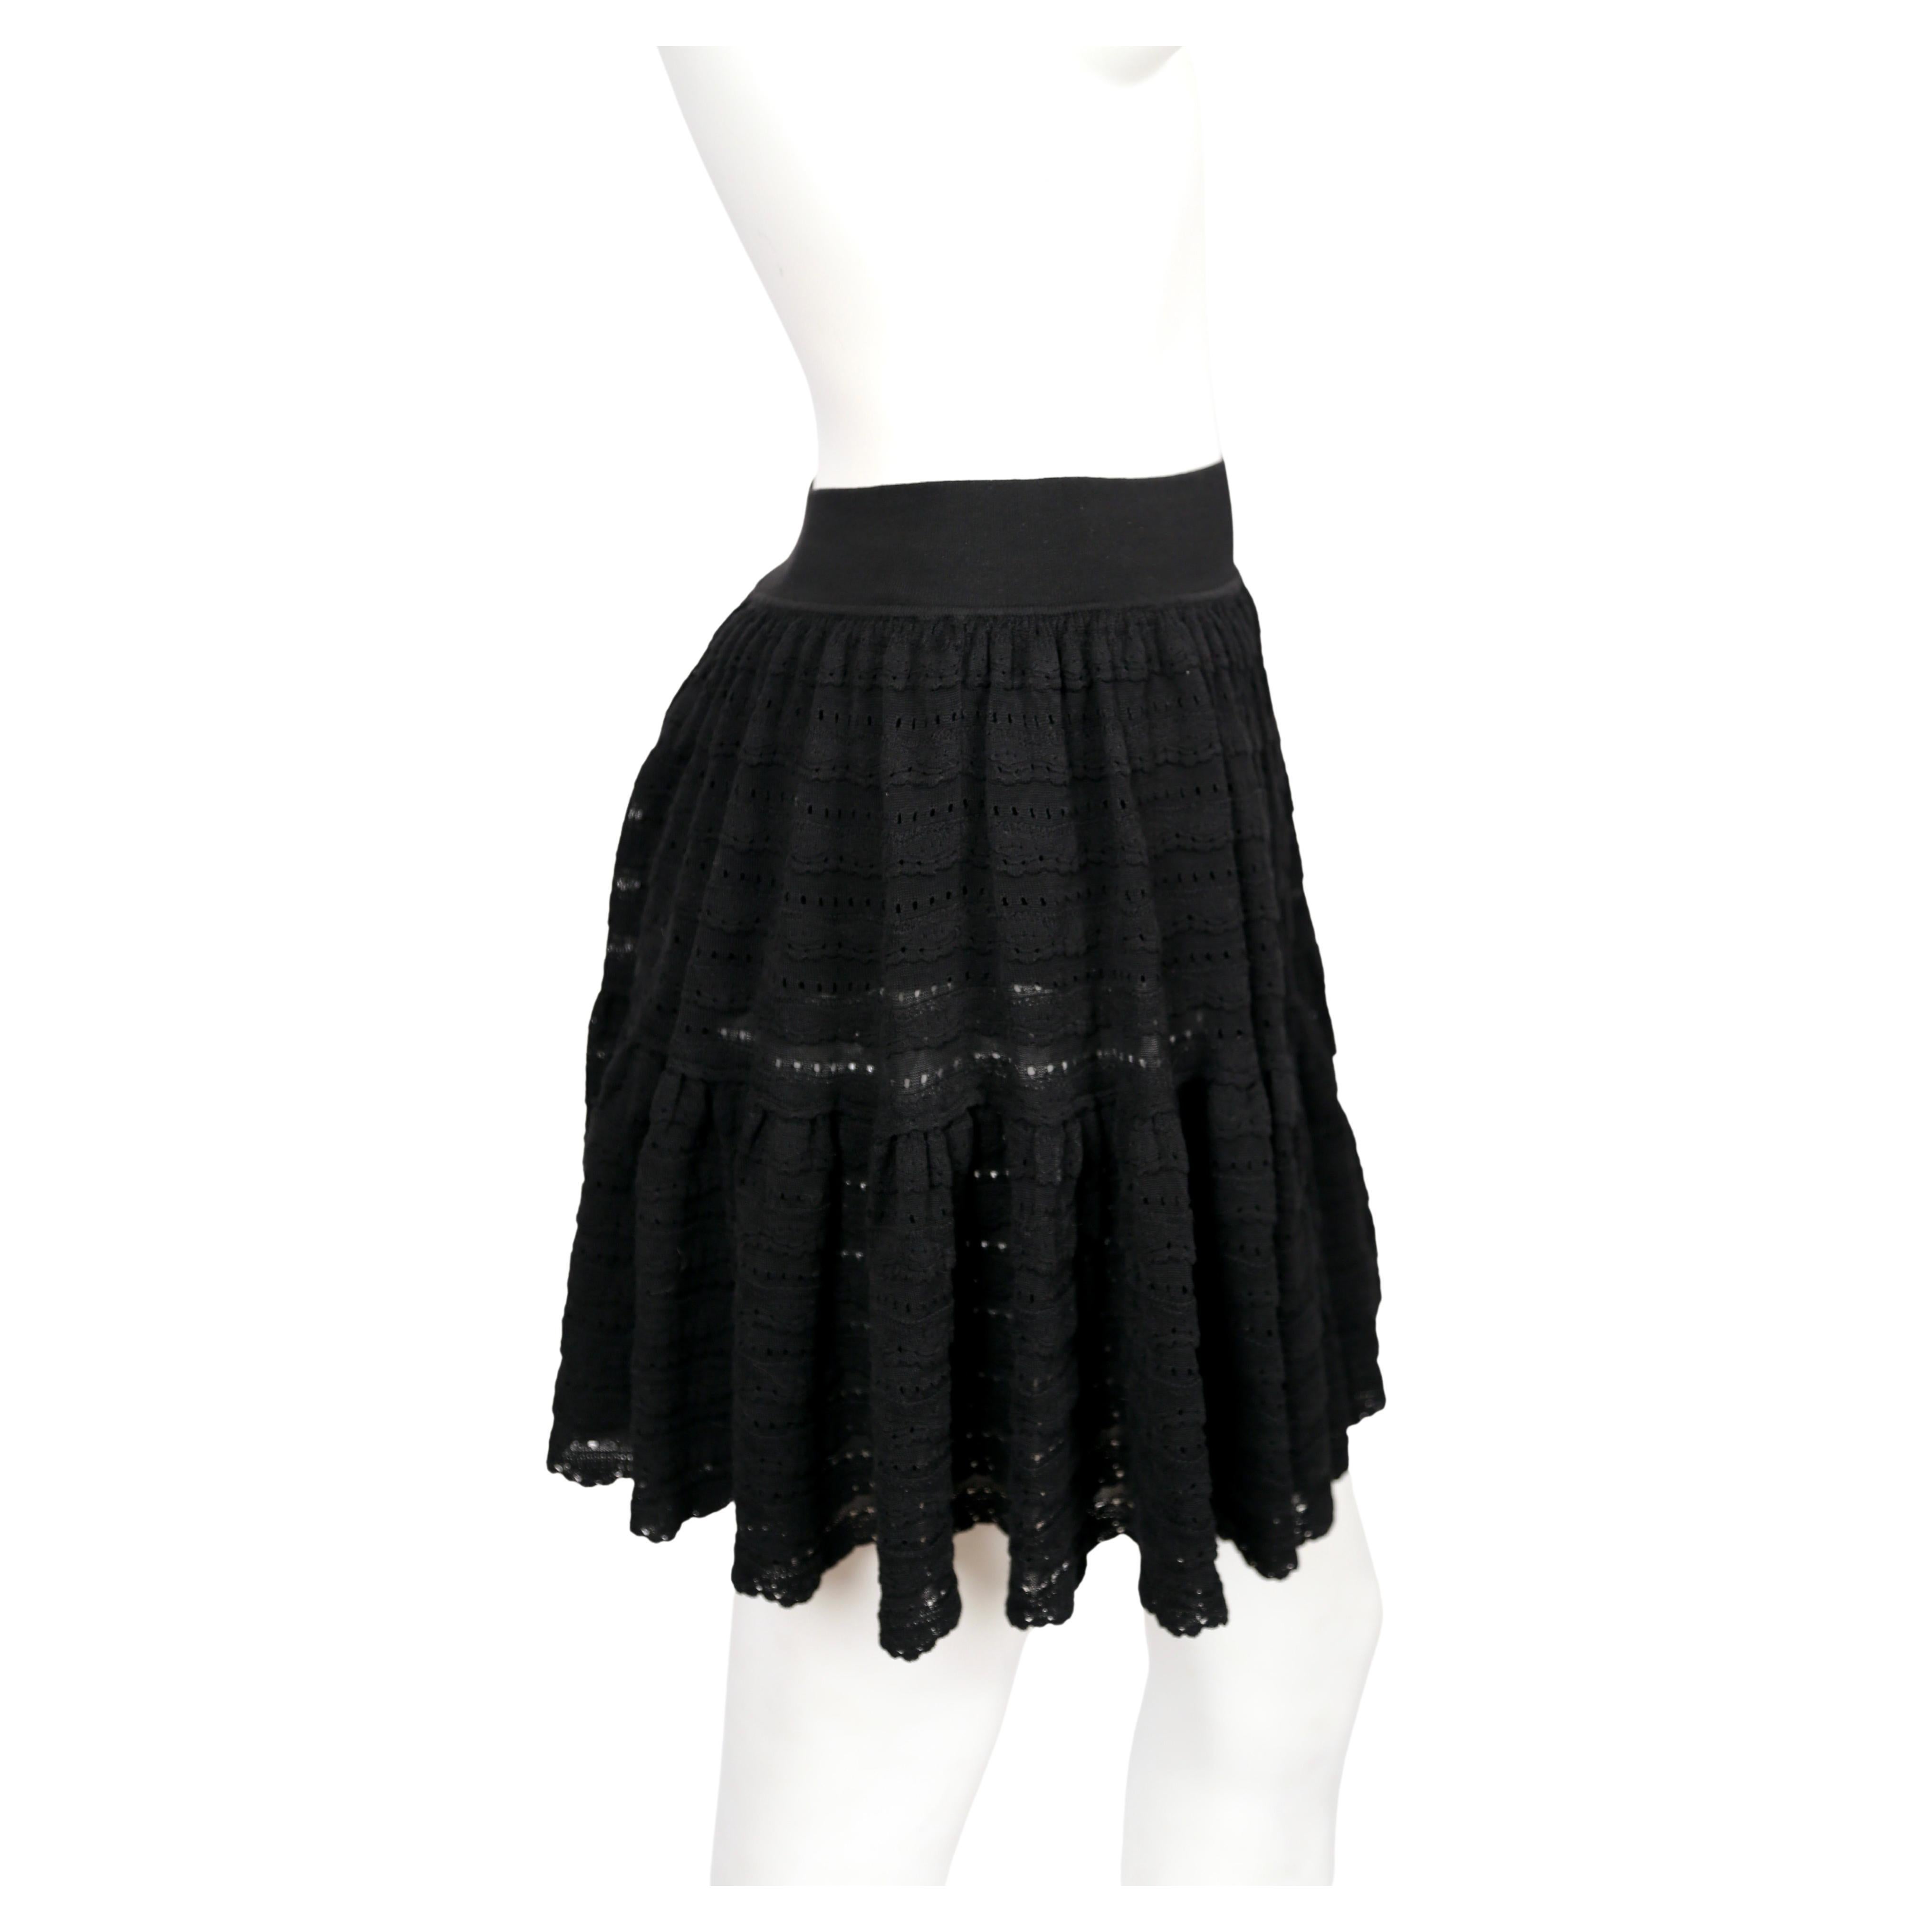 2000's AZZEDINE ALAIA black pointelle knit skirt with ruffles & hidden shorts In Good Condition For Sale In San Fransisco, CA